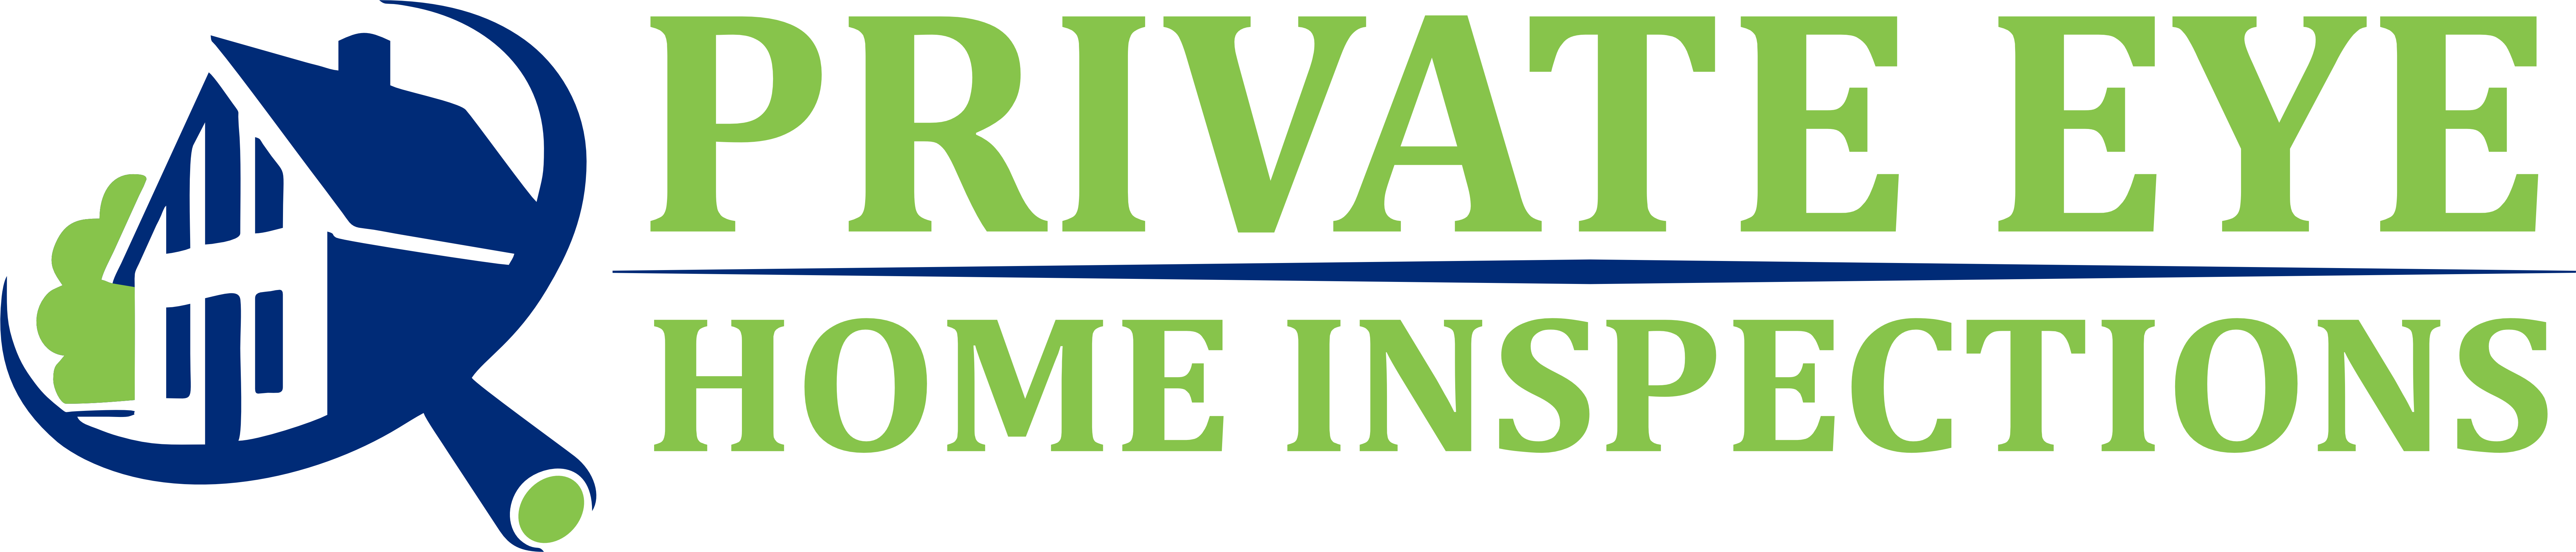 Private Eye Home Inspections